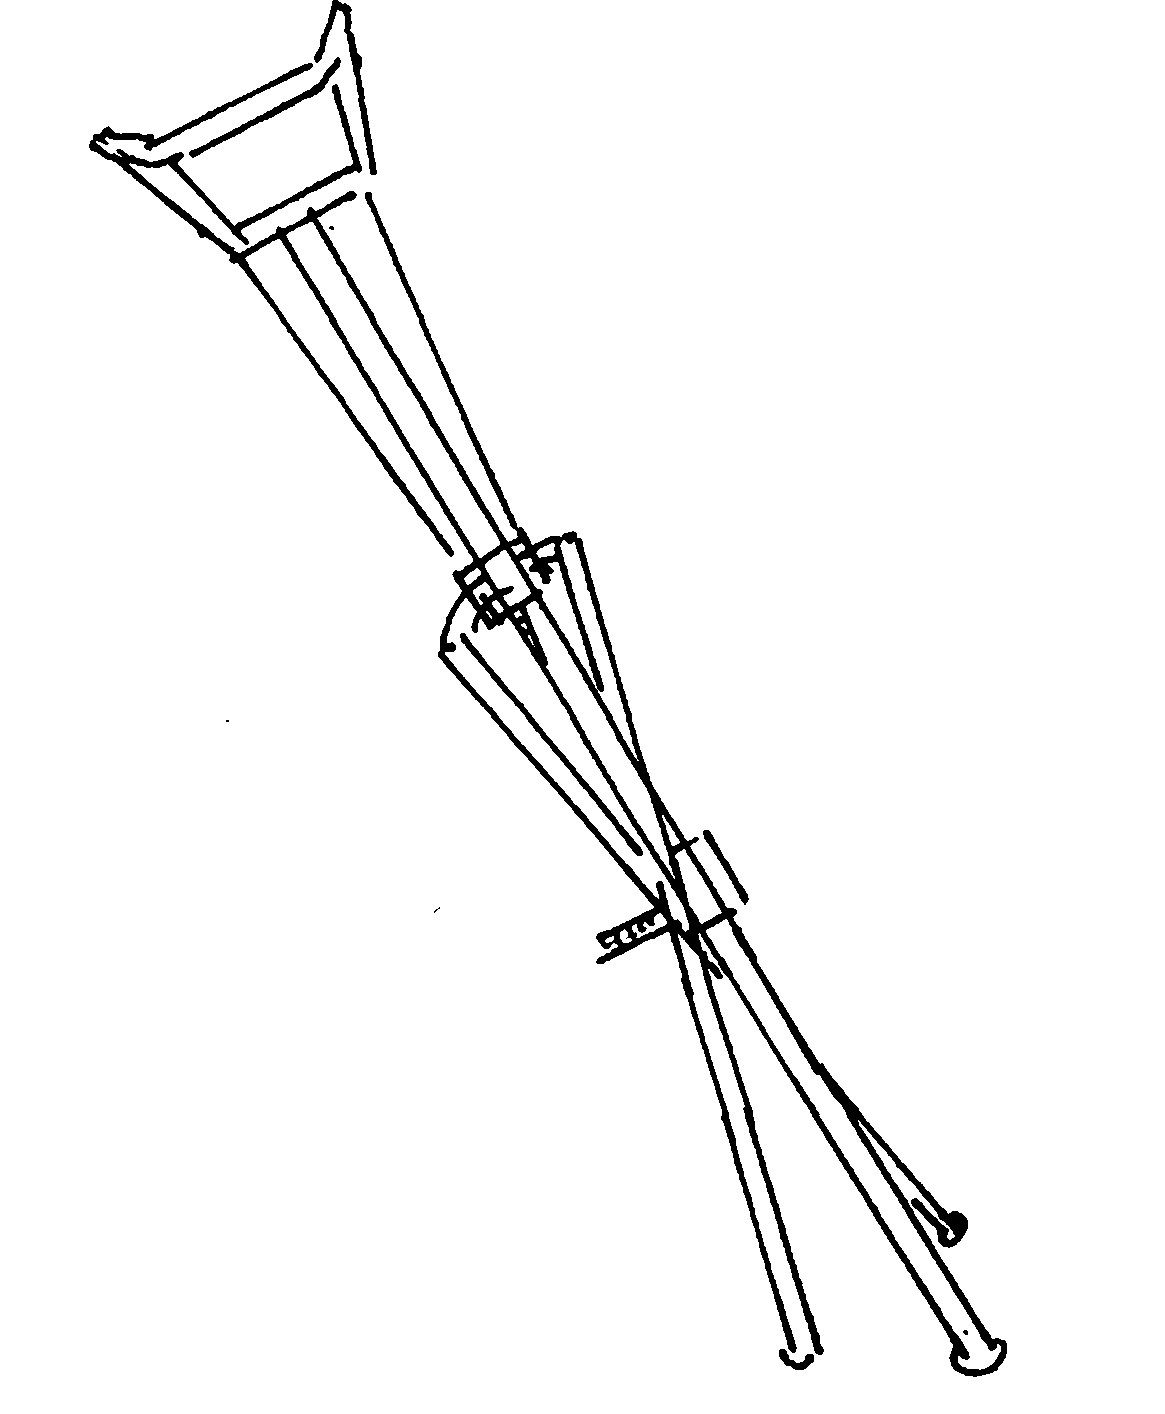 Armpit walking stick for the disabled having difficulty in walking